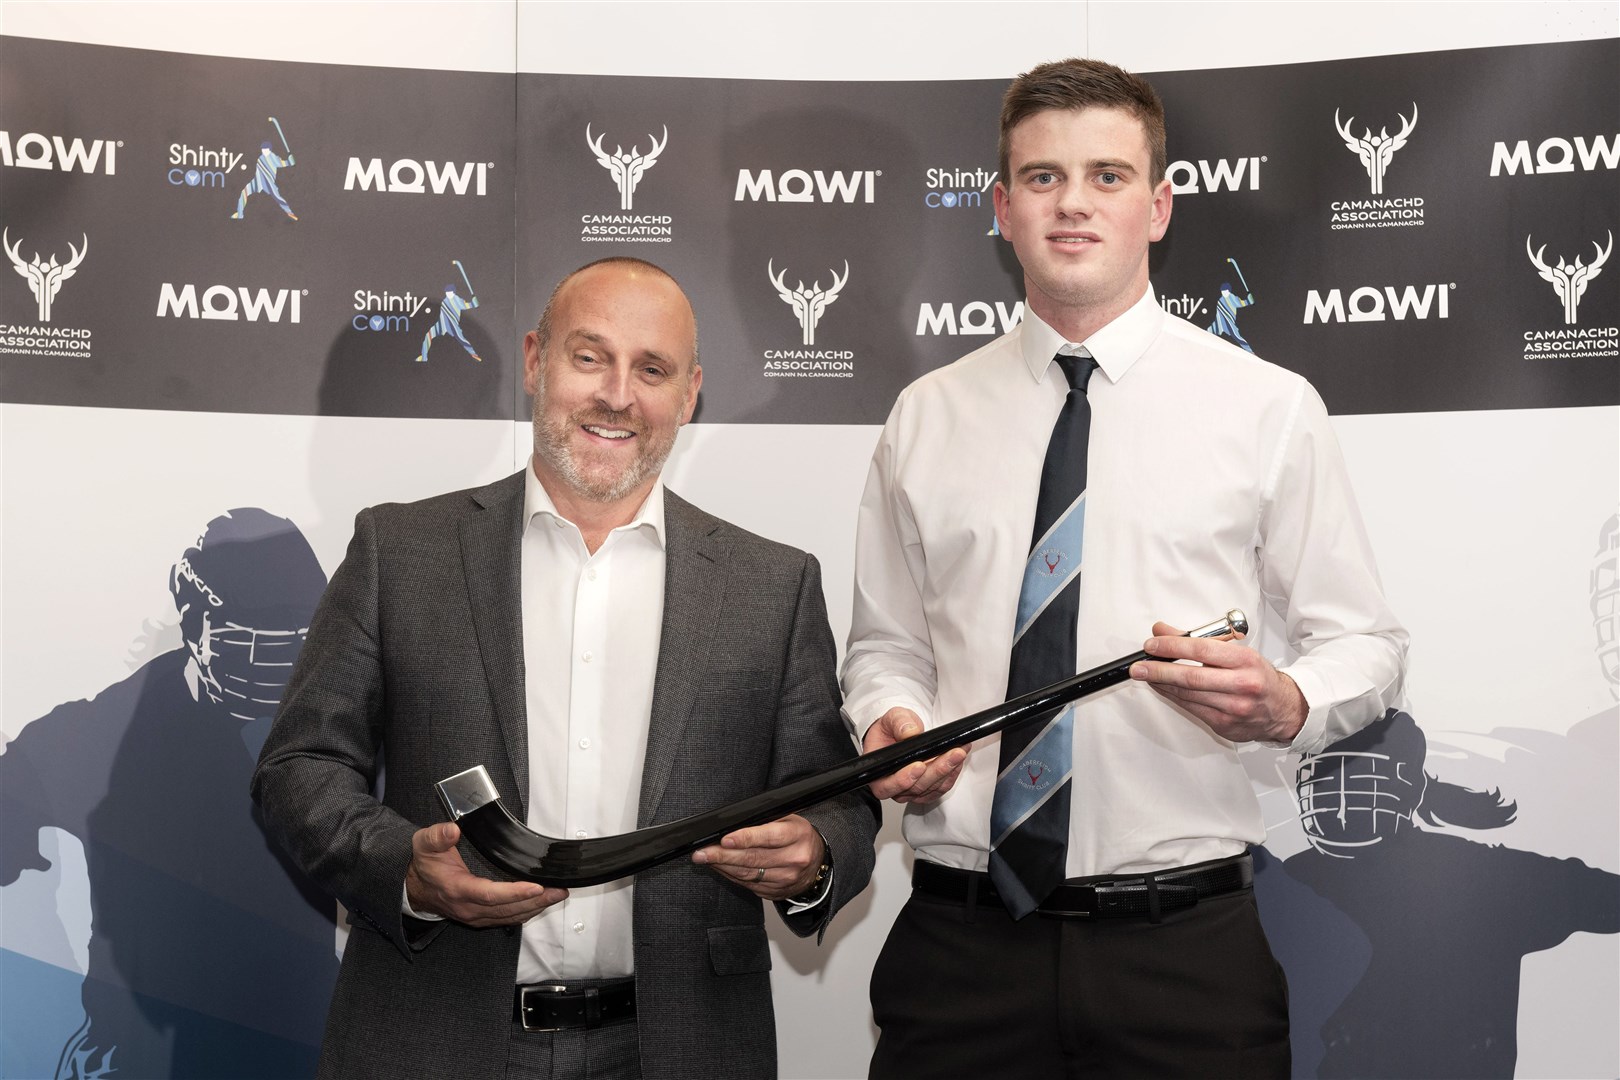 Mowi’s Ian Roberts presents the Player of the Year award to Caberfeidh’s Craig Morrison. Mowi Shinty Awards Luncheon and Conference at The Kingsmills Hotel, Inverness.